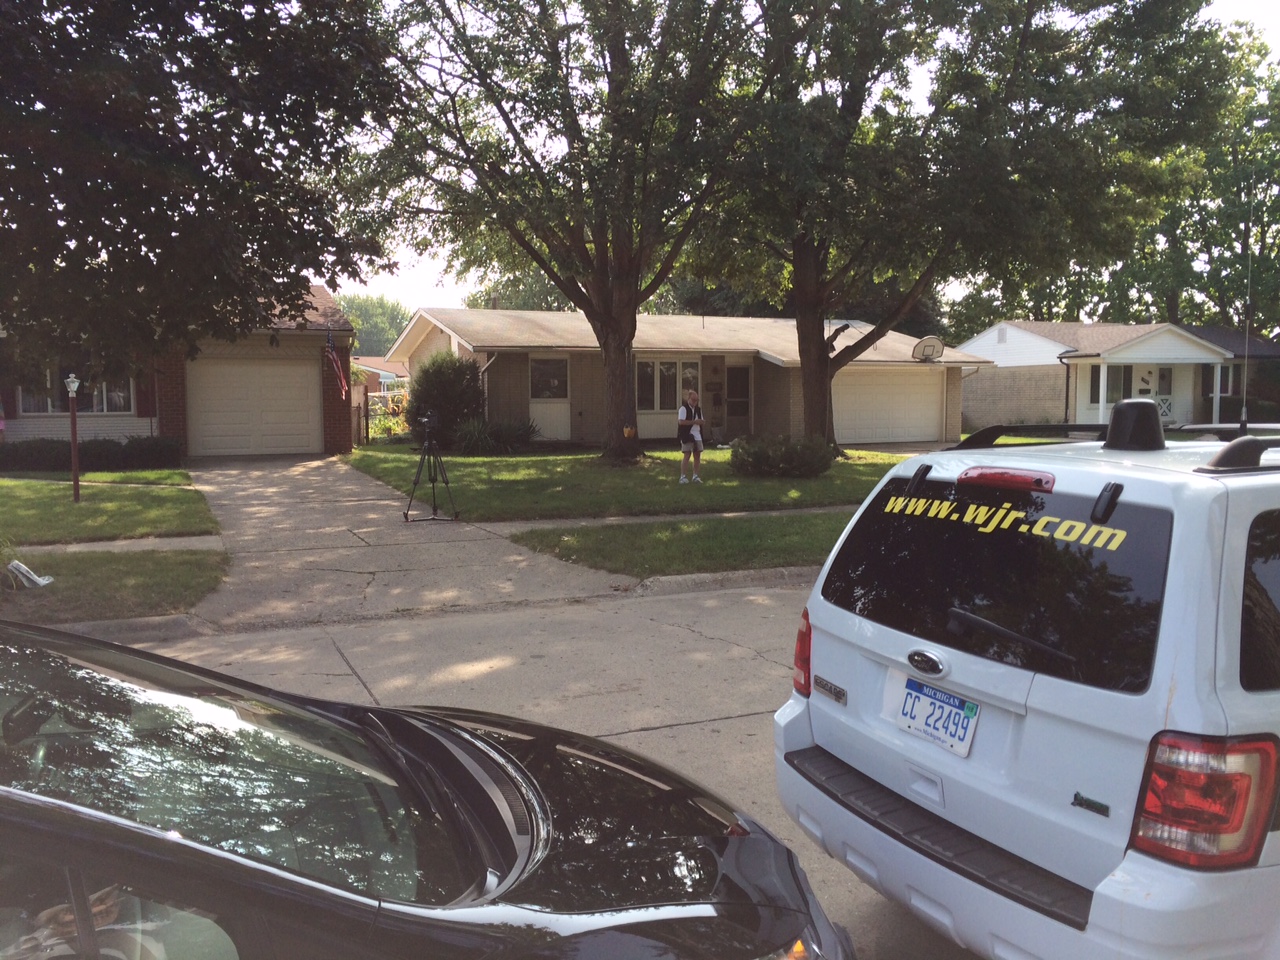 3 stabbed, 2 killed by family member in Sterling Heights